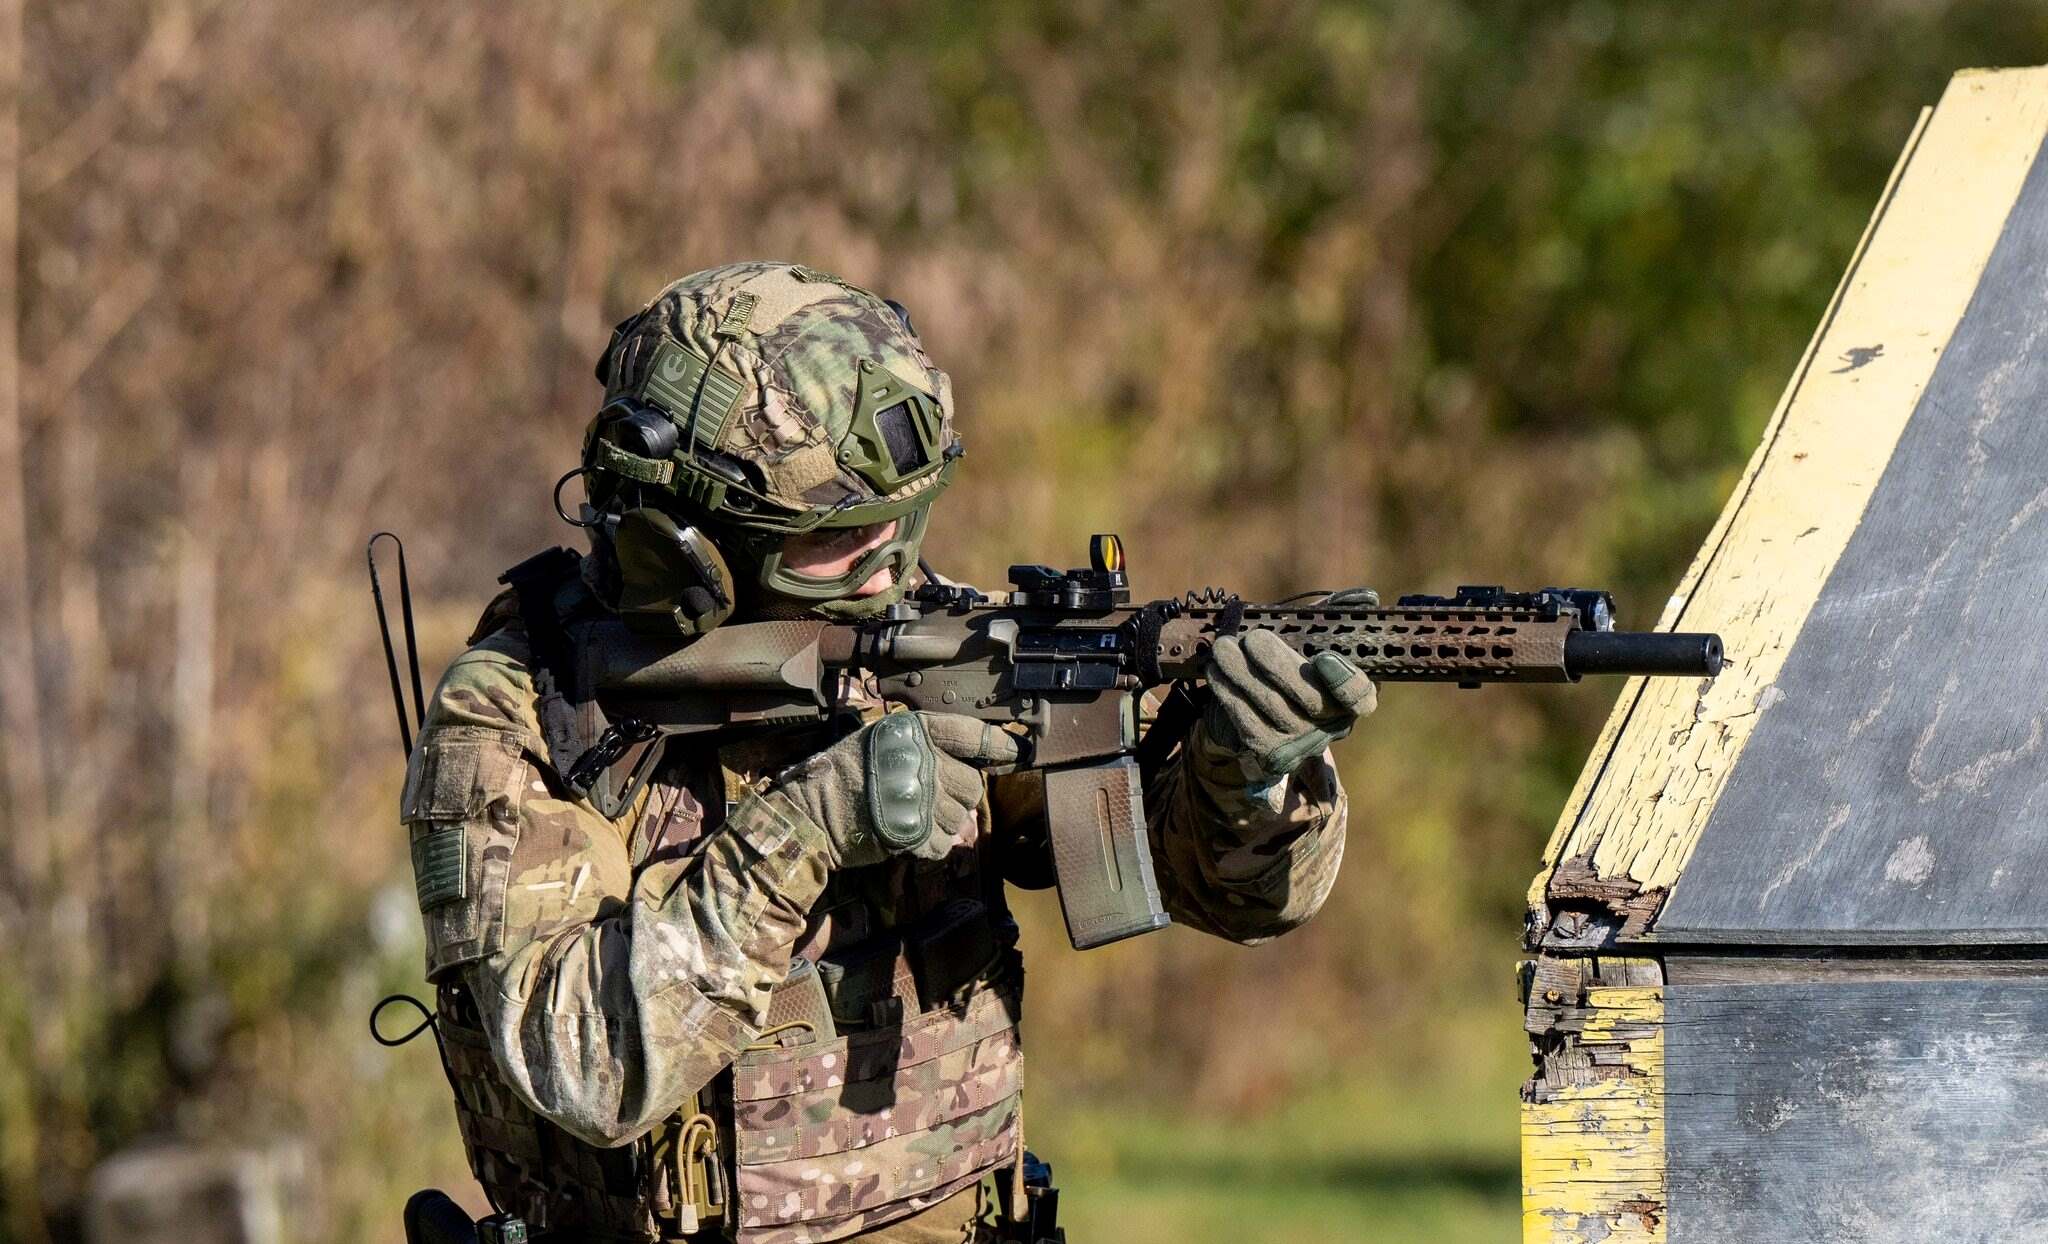 12 Surprising Facts About Airsoft - Facts.net